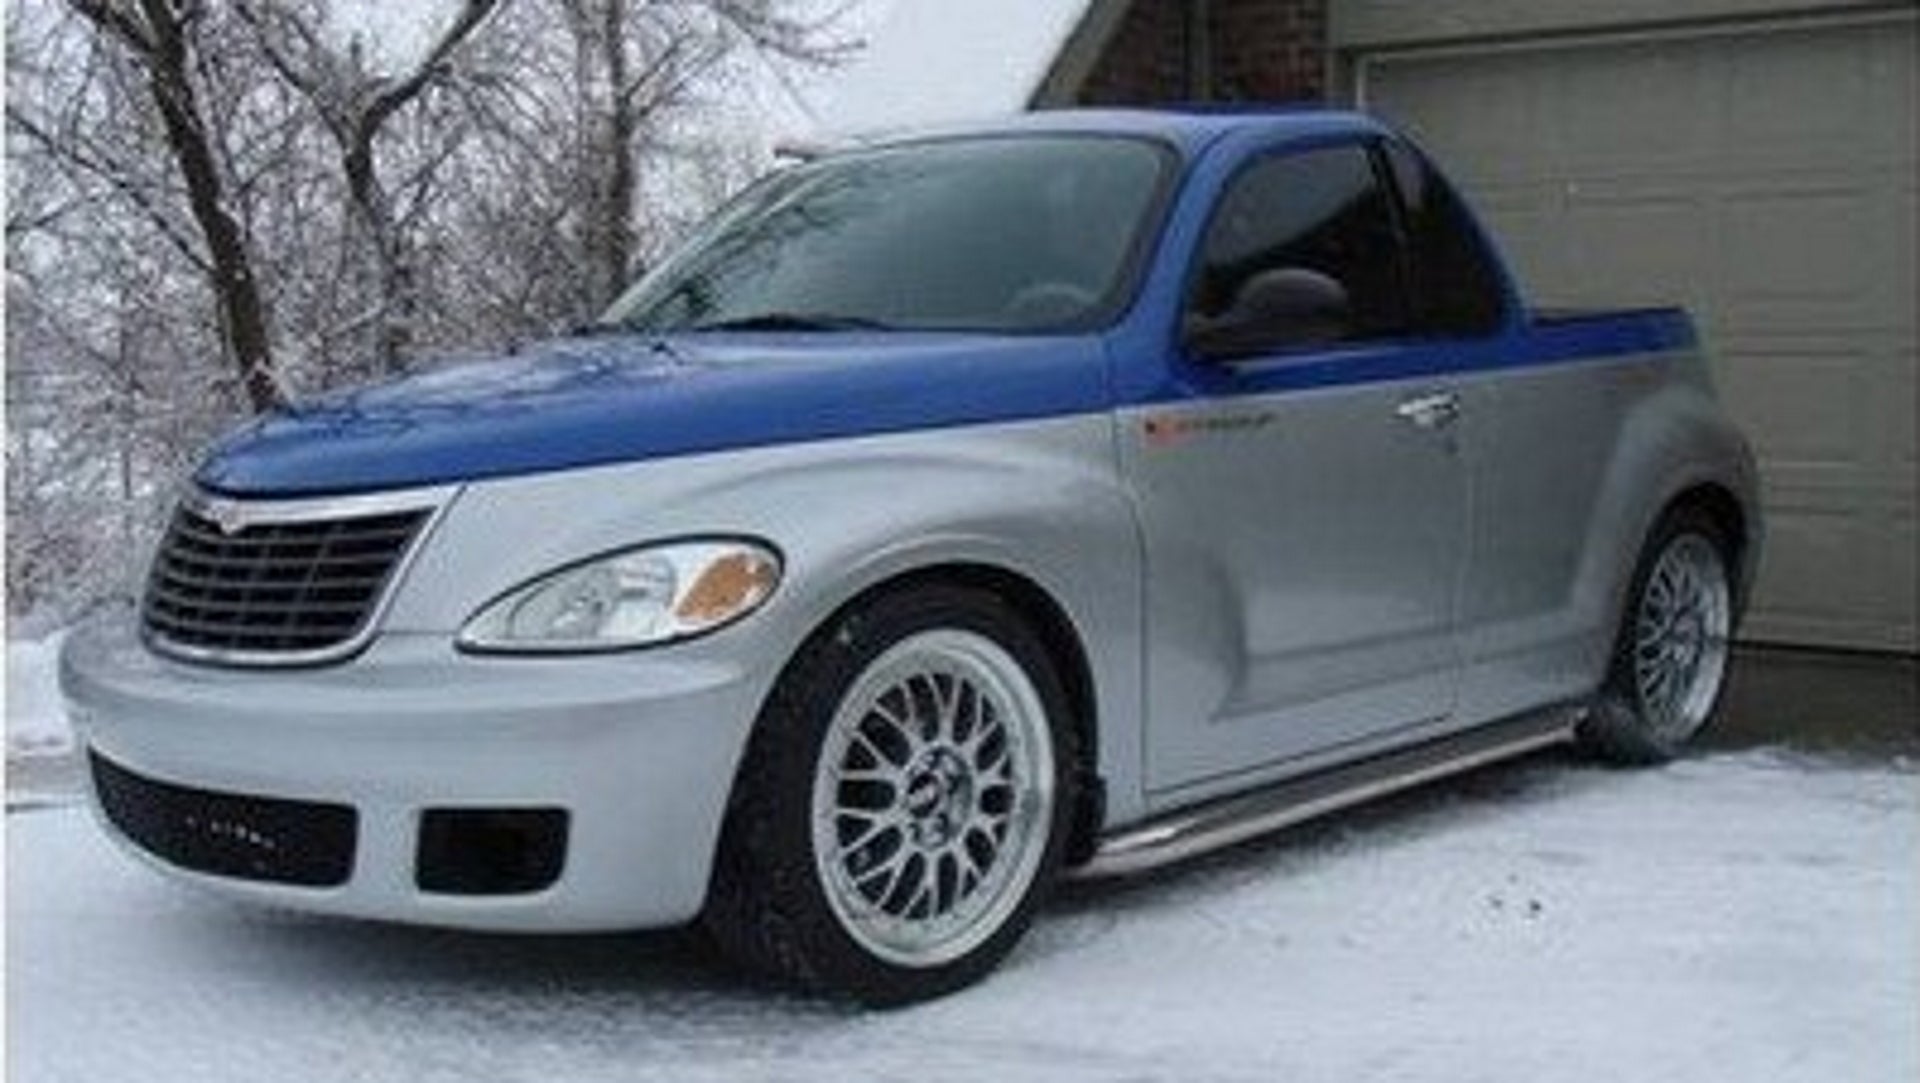 Some Mastermind Swapped a Viper V-10 Into a Chrysler PT Cruiser